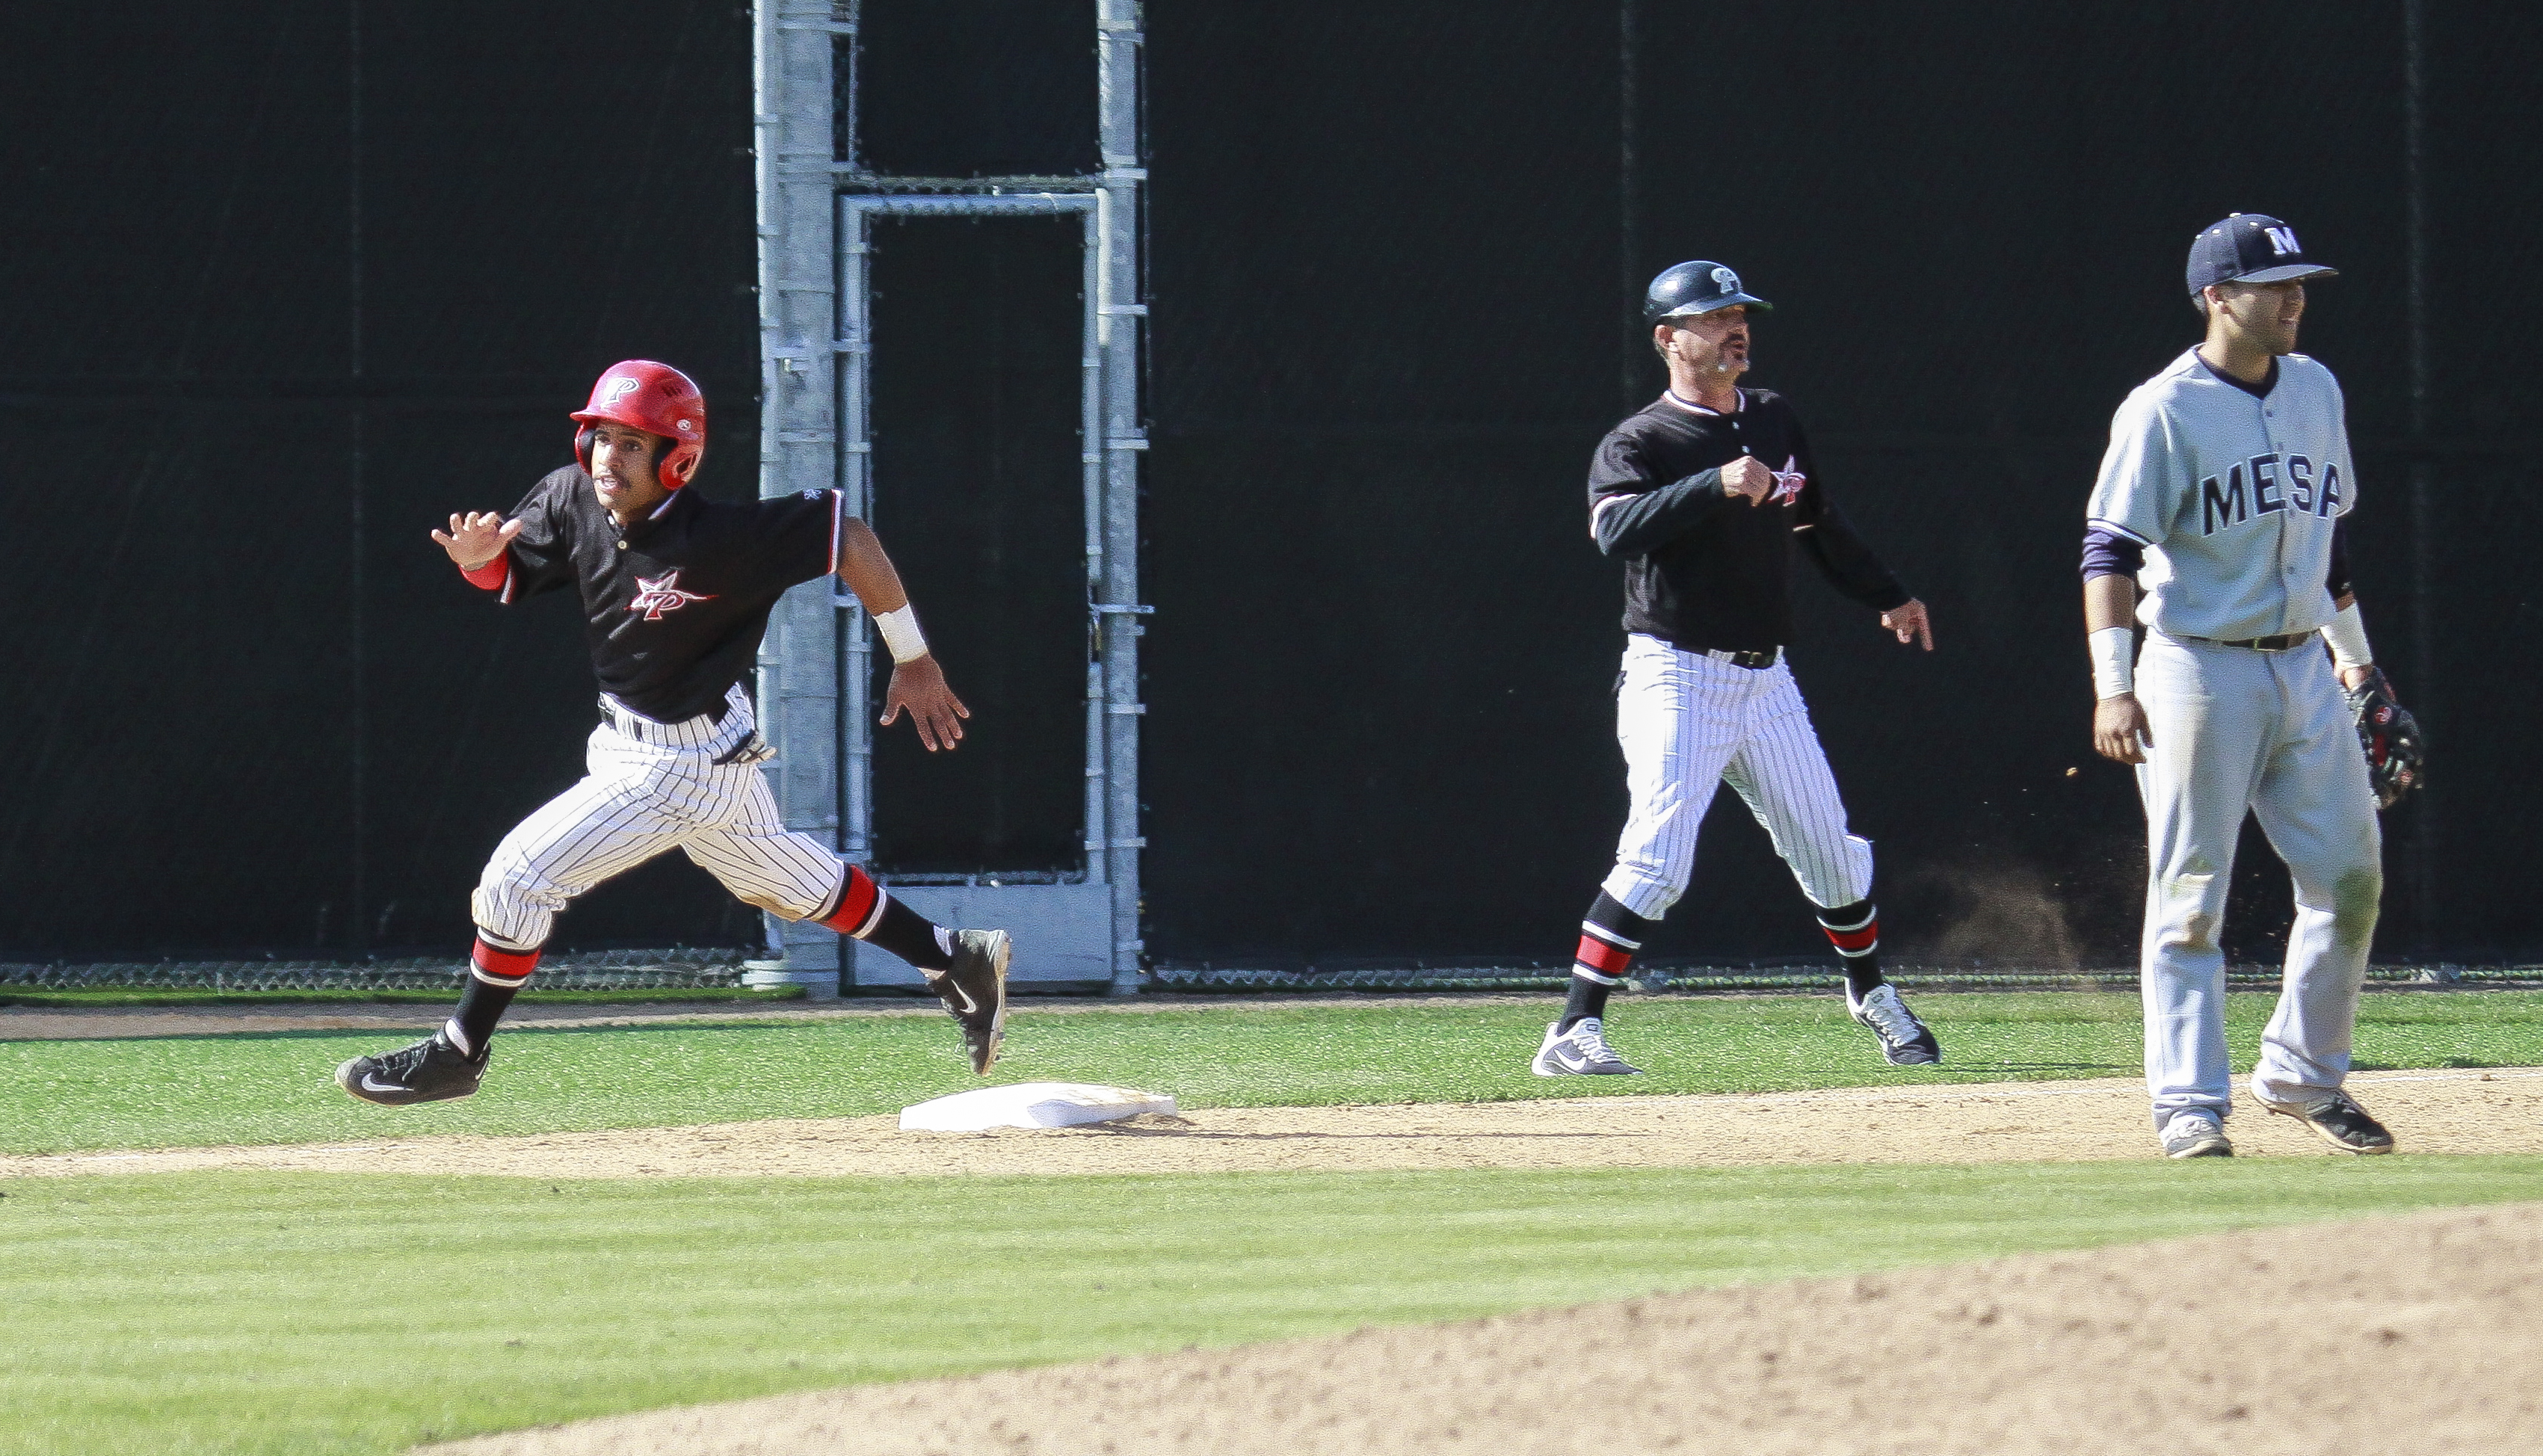 Palomar's Nashea Diggs rounds 3rd base on a 5th inning double by Chase Grant on March 22 against San Diego Mesa College at Palomar Ballpark. Diggs scored on the play putting The Comets ahead 8-4. Grant would score on a RBI by Mike Benson. Stephen Davis/The Telescope